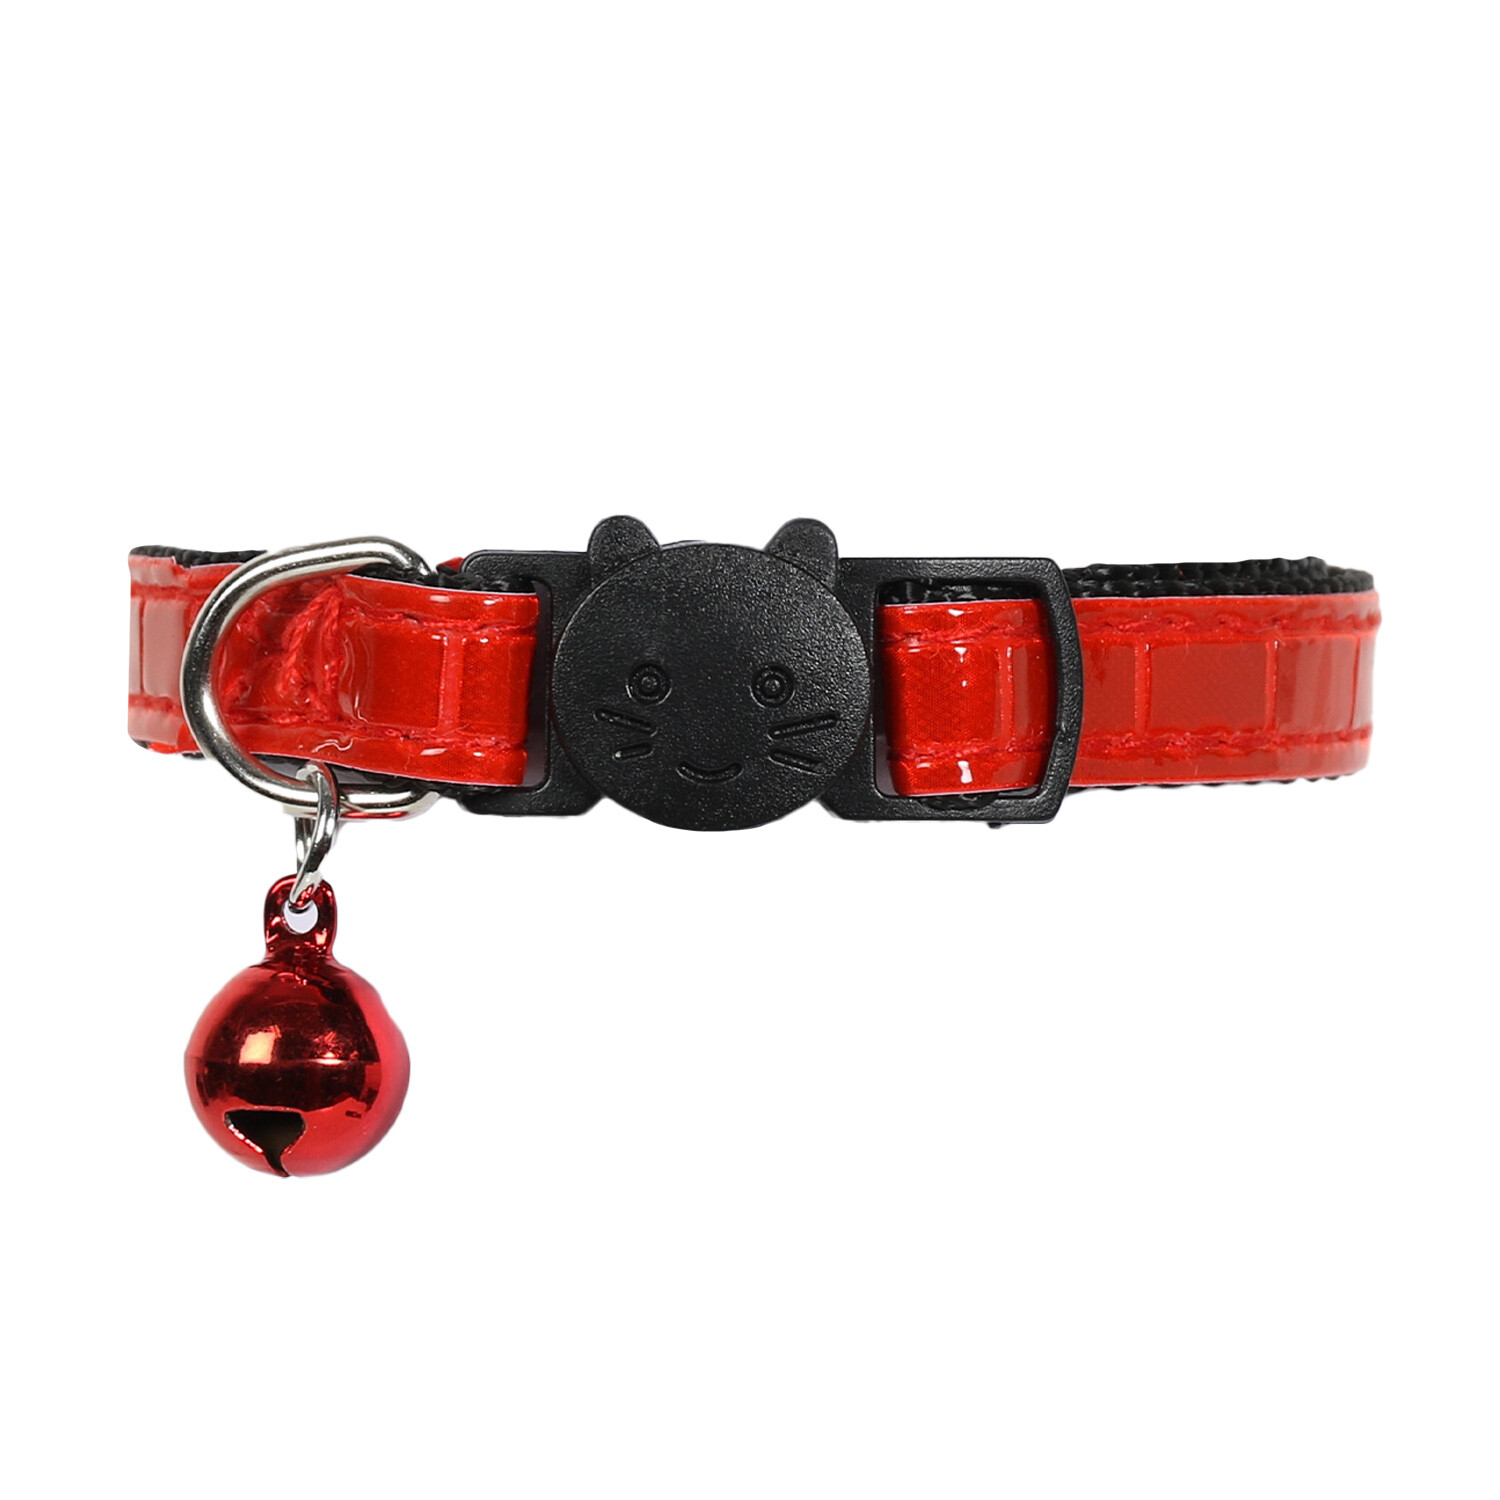 Reflective Cat Collar with Bell - Red Image